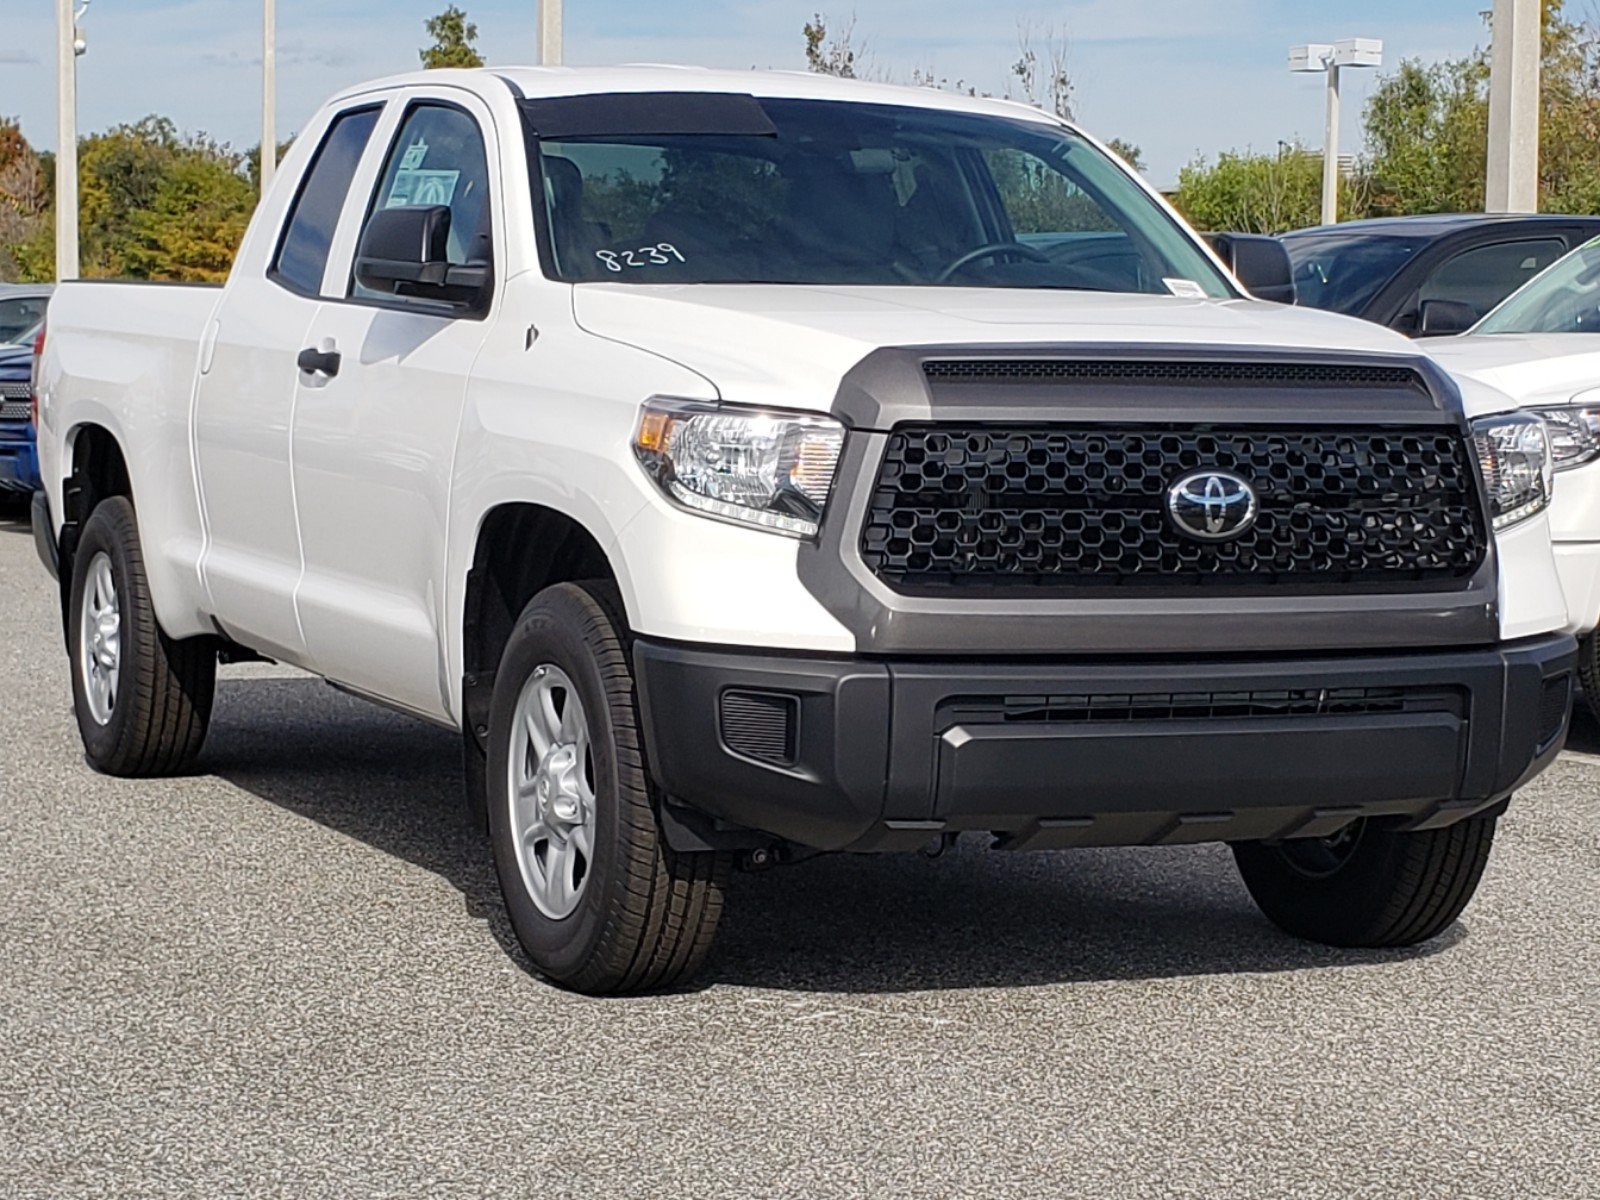 New 2019 Toyota Tundra SR Double Cab in Orlando #9820026 | Toyota of